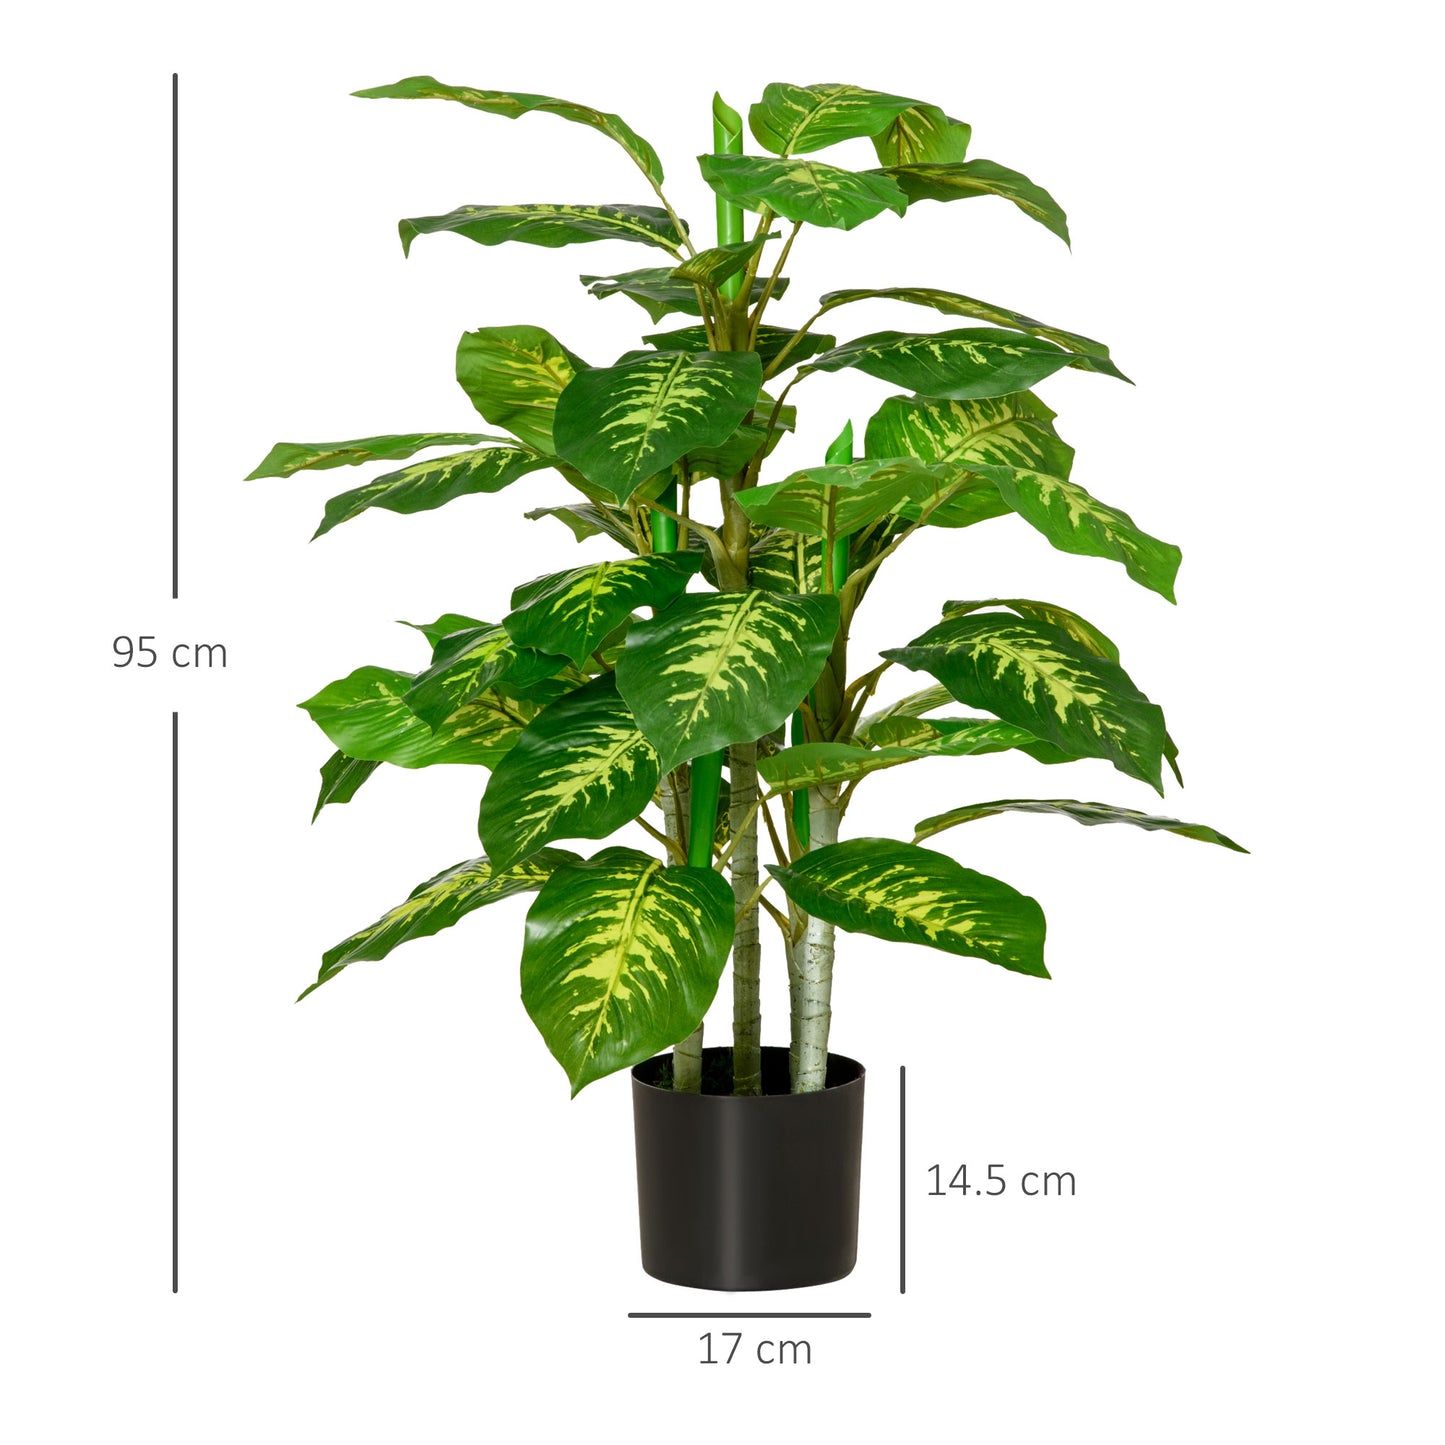 Homcom Artificial Evergreen Plant Realistic Fake Tree Potted Home Office Décor 95cm